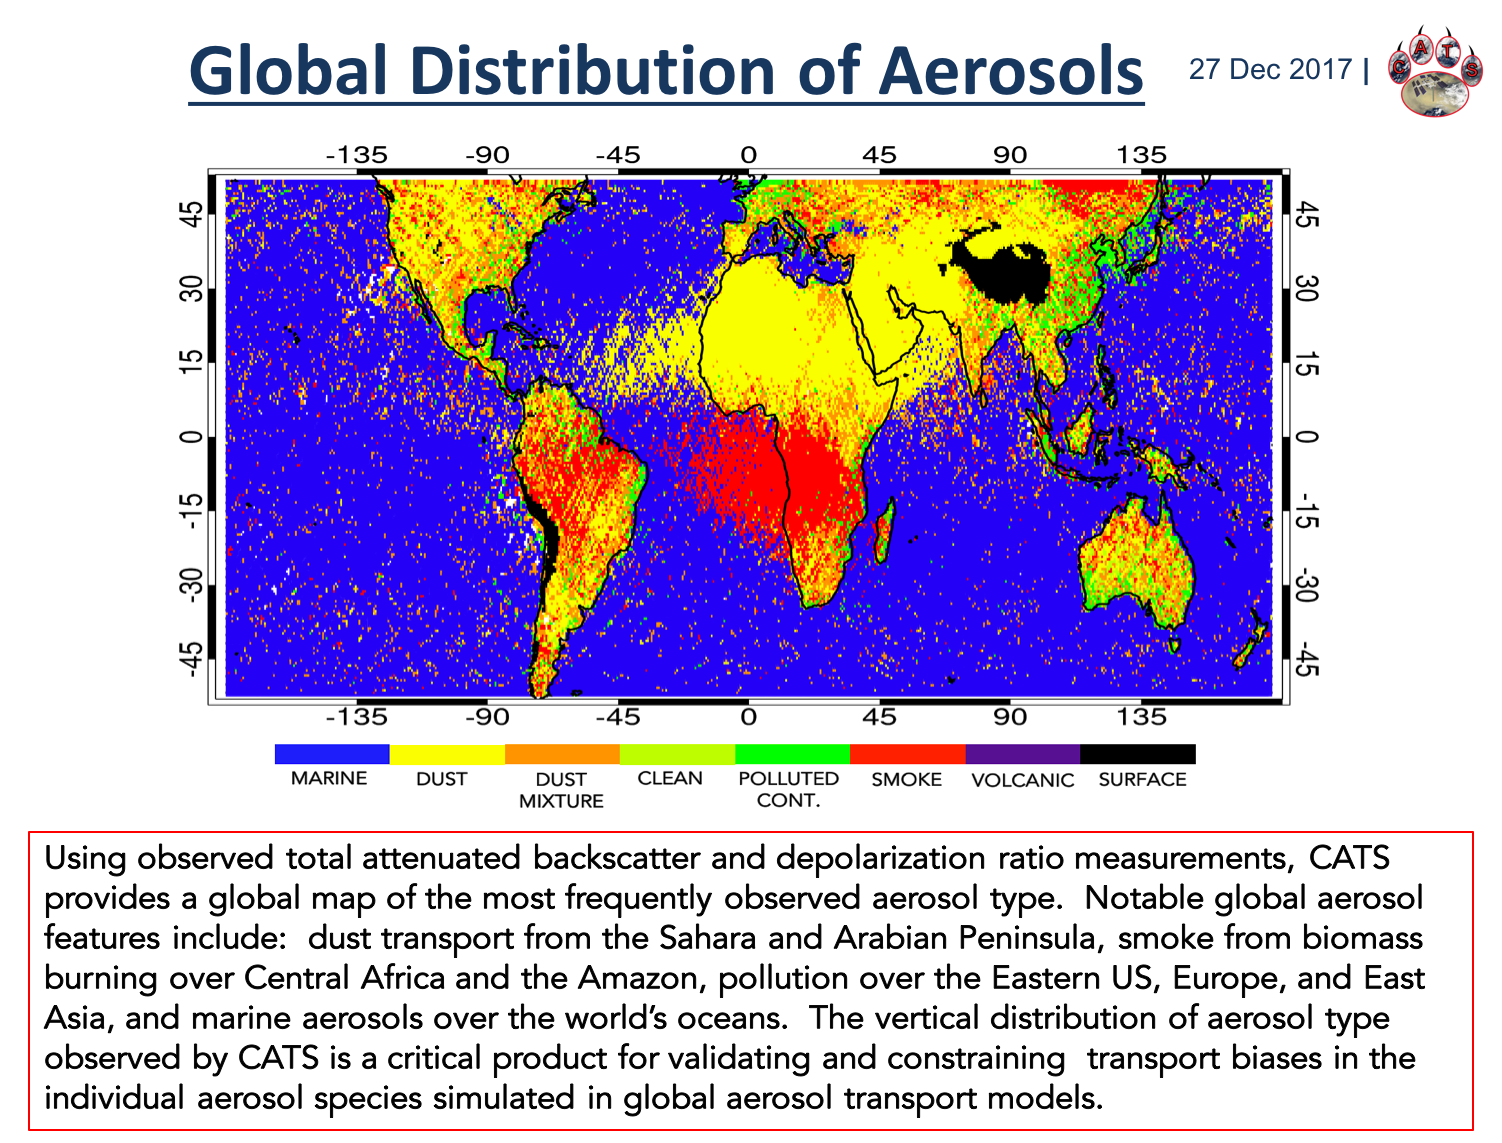 Global Distribution of Aerosols Observed by CATS